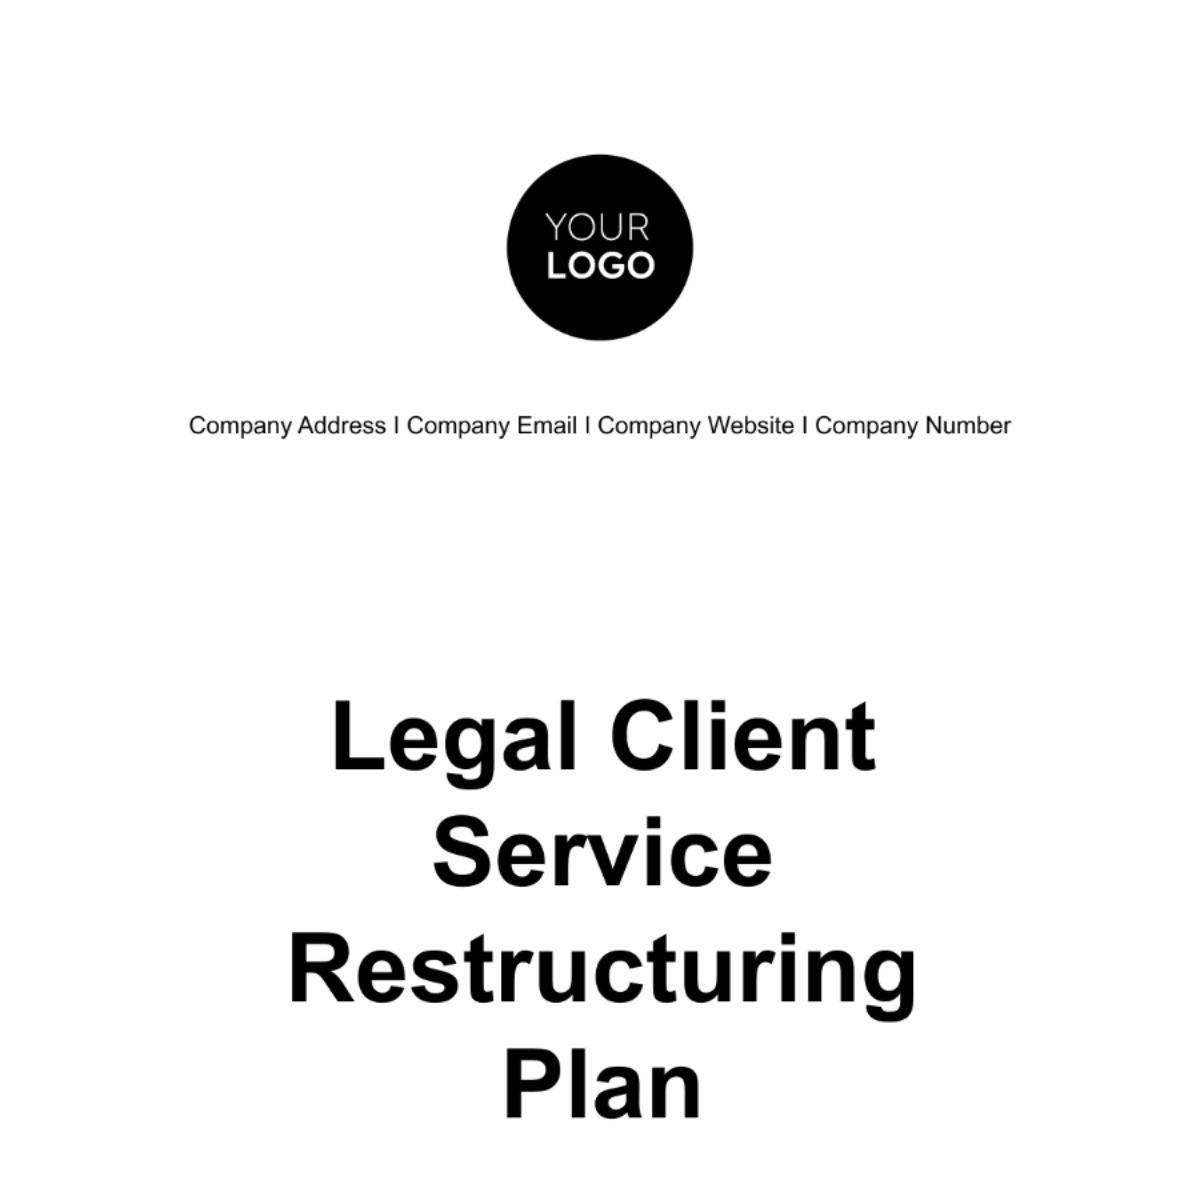 Legal Client Service Restructuring Plan Template